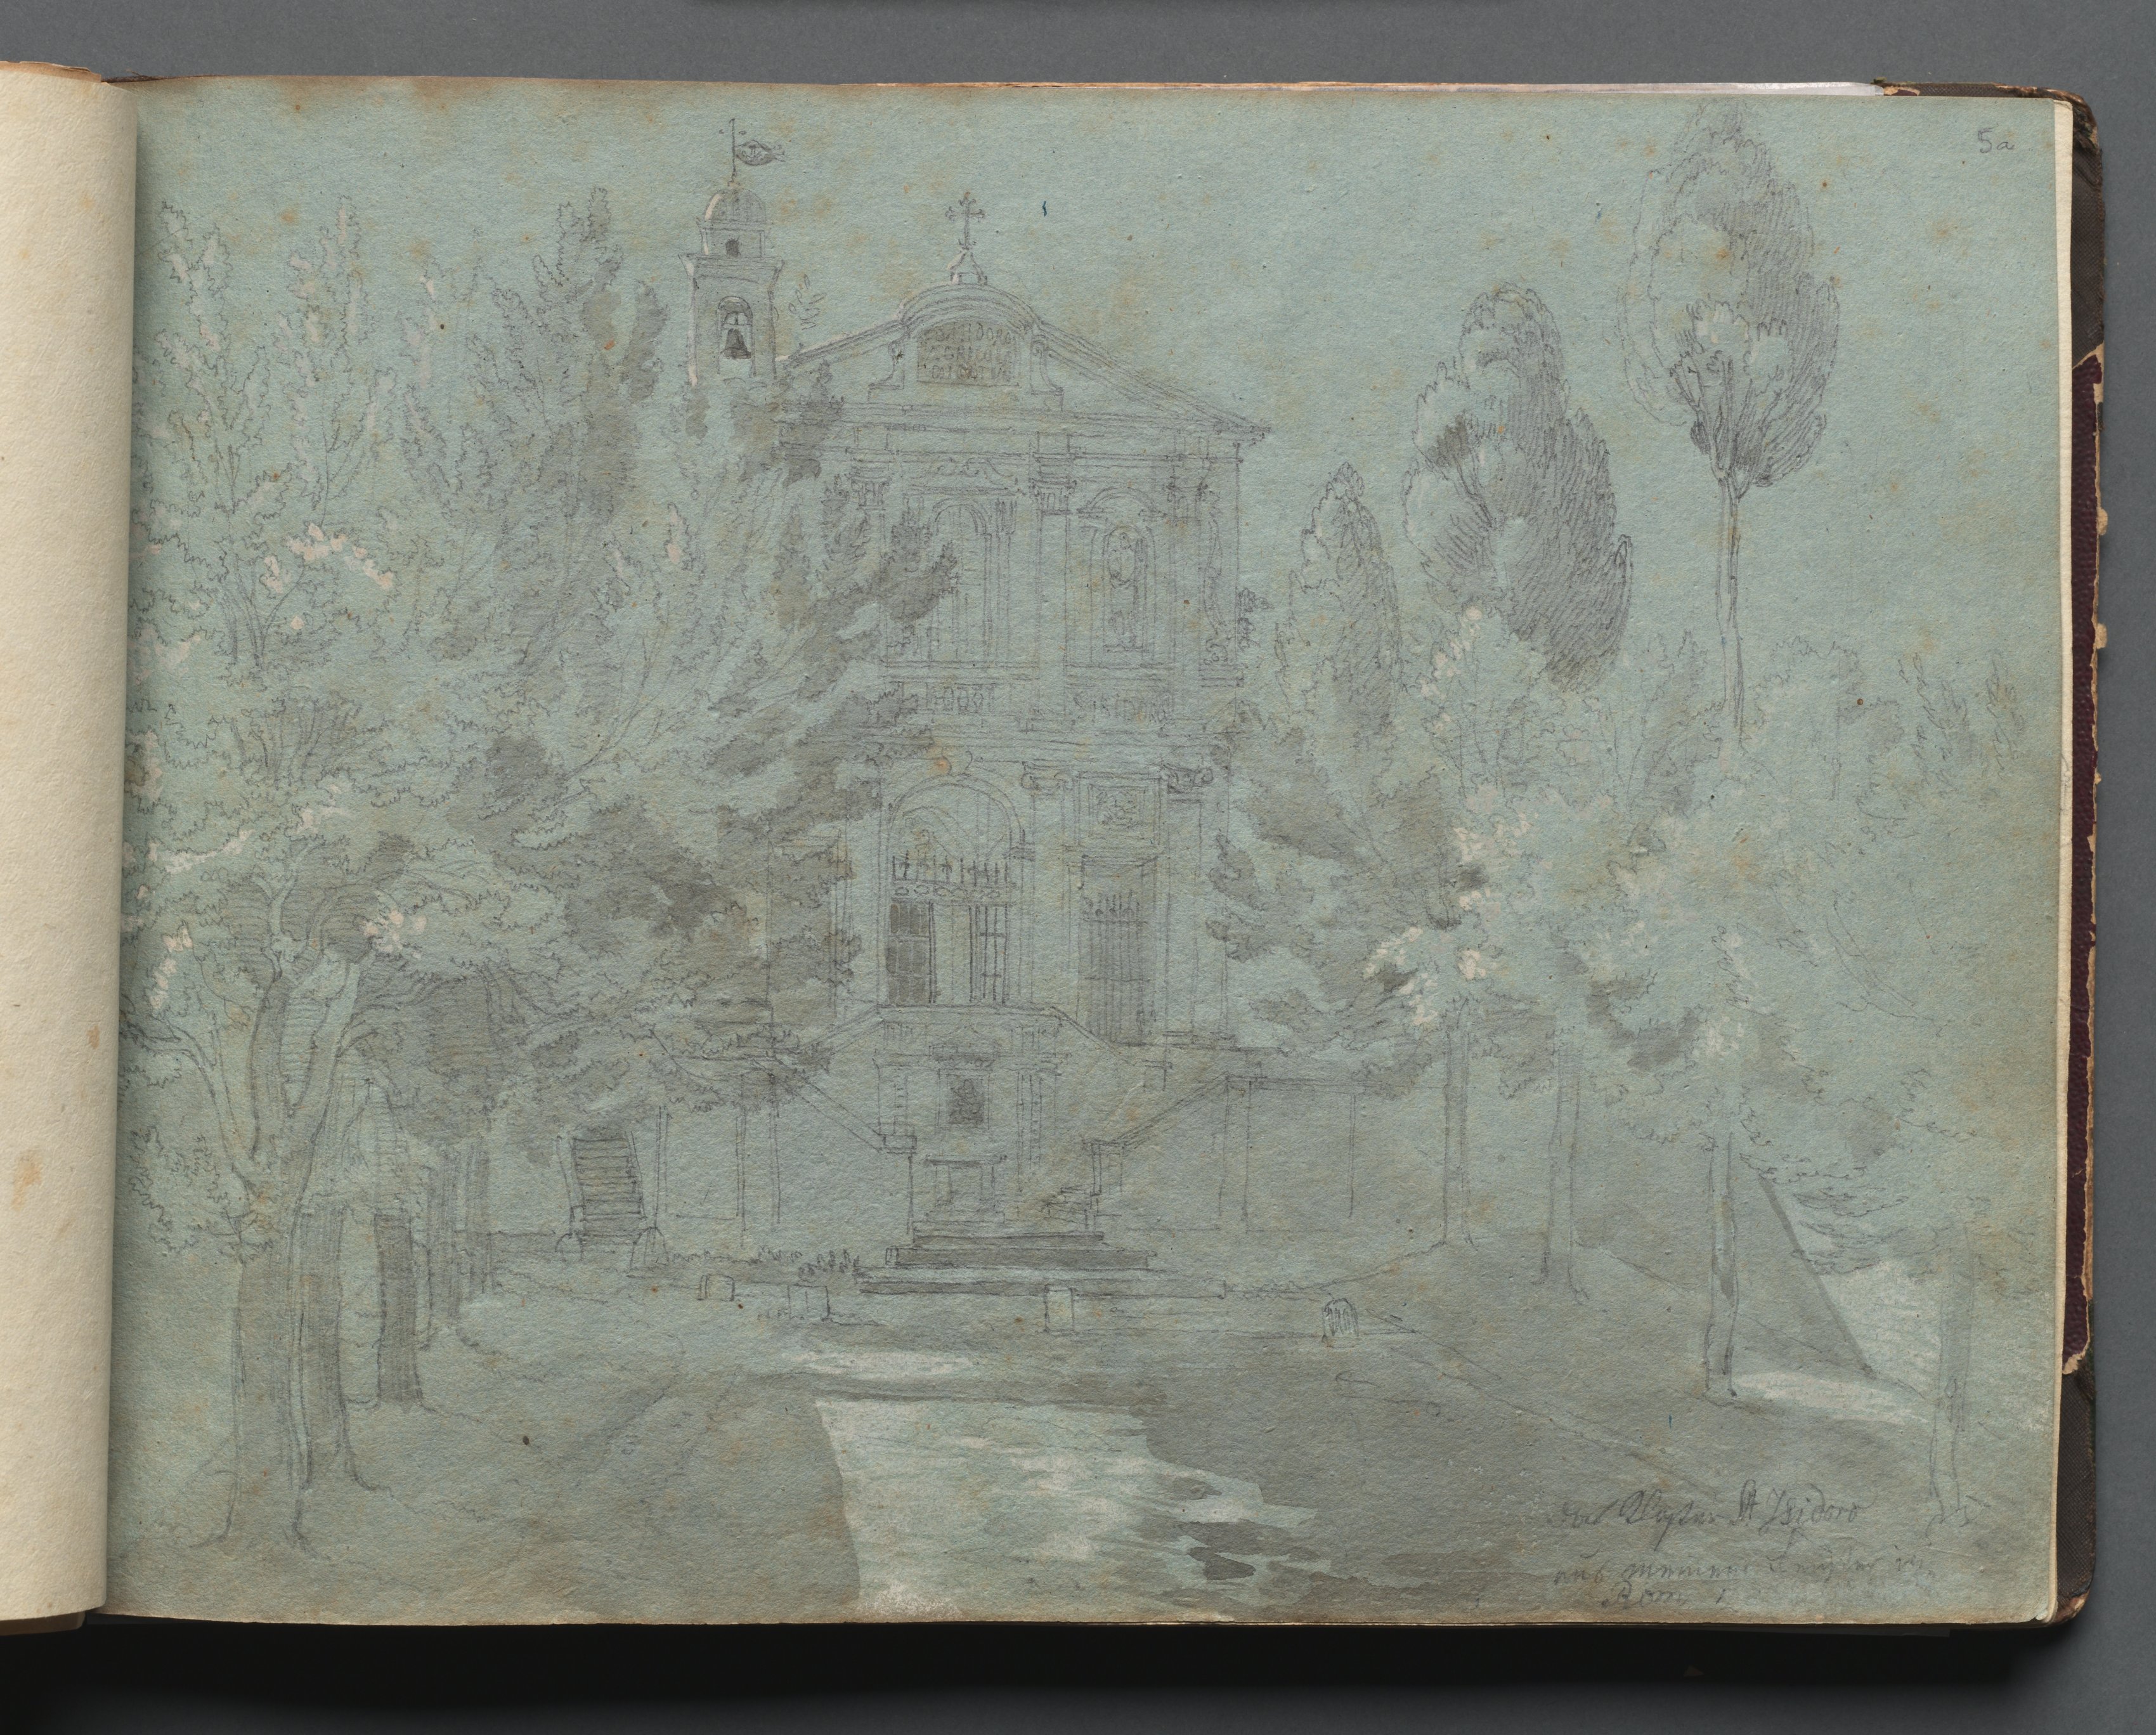 Album with Views of Rome and Surroundings, Landscape Studies, page 05a: "Saint Isidoro"